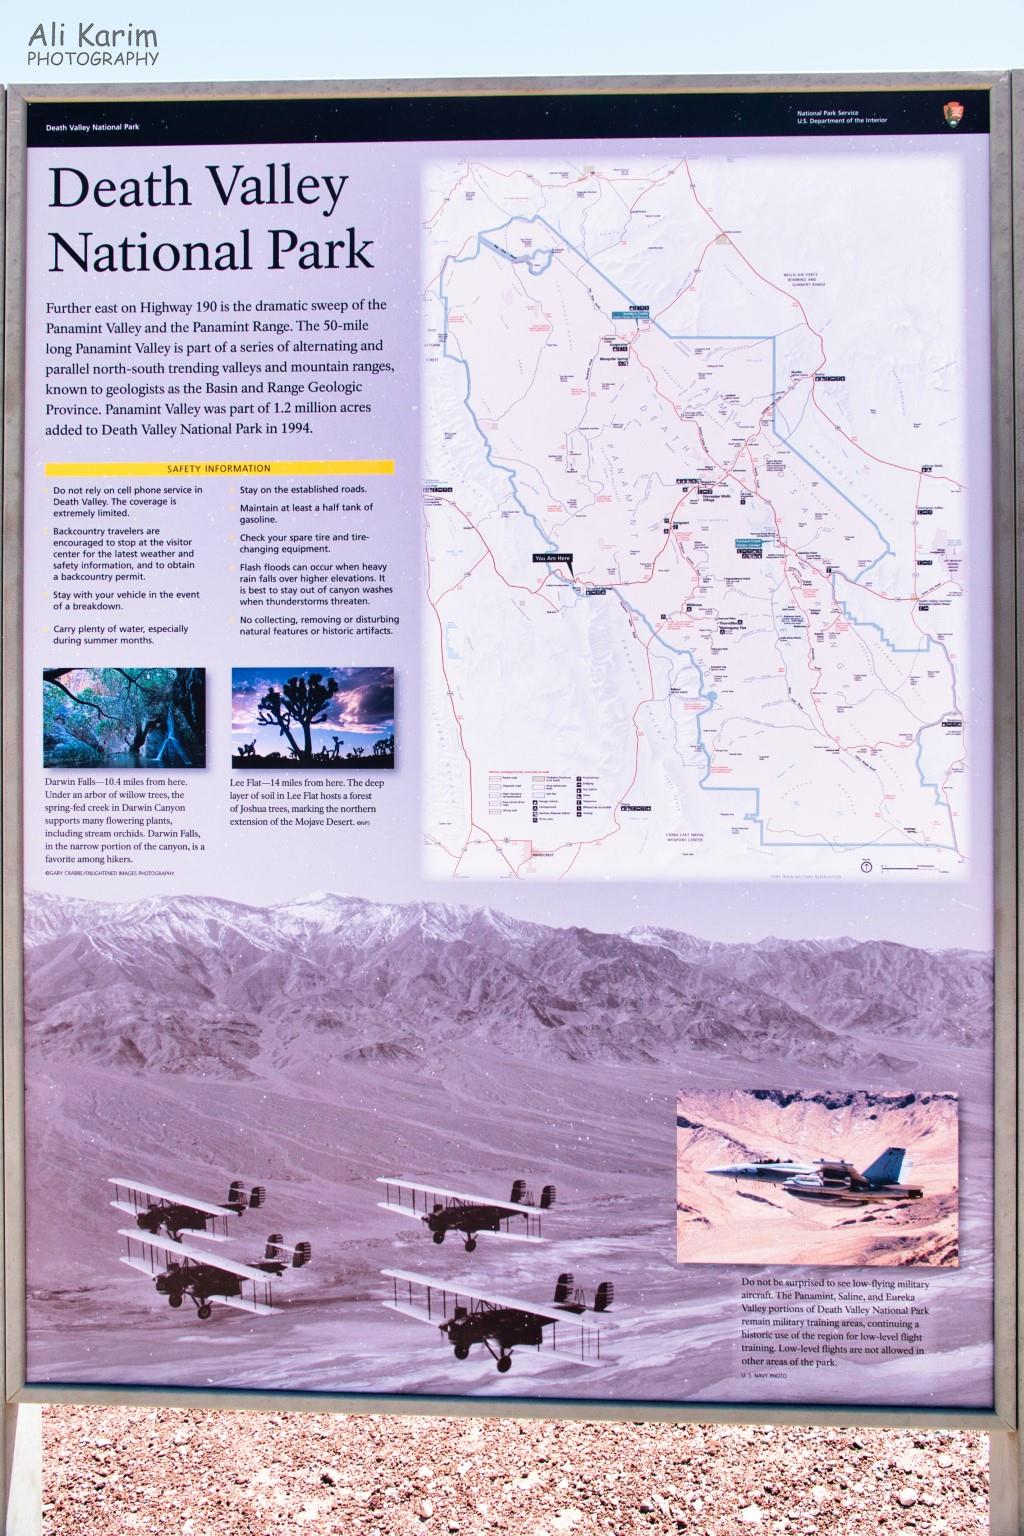 Yosemite to Death Valley, June 2020, Interesting sign with warnings and gave notice about the low level military flight training